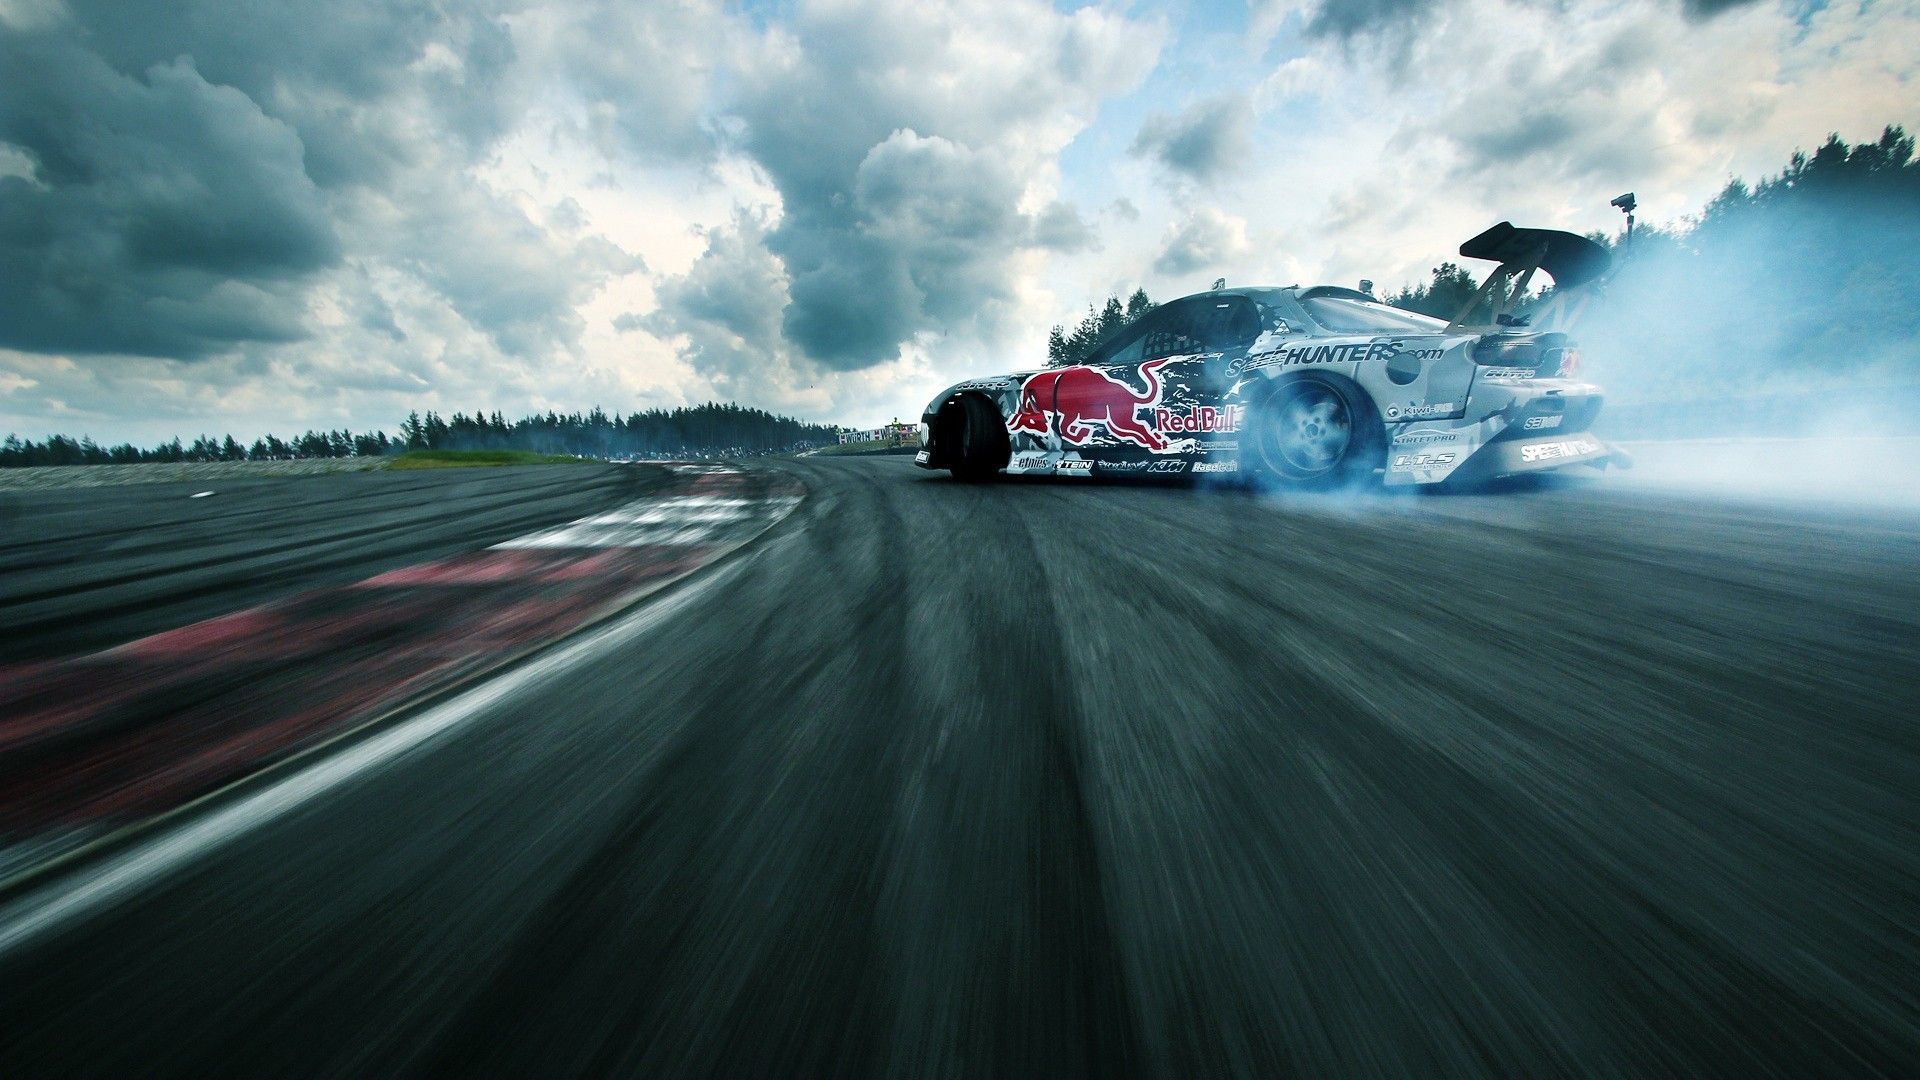 Drift racing car on the track wallpaper and image, picture, photo